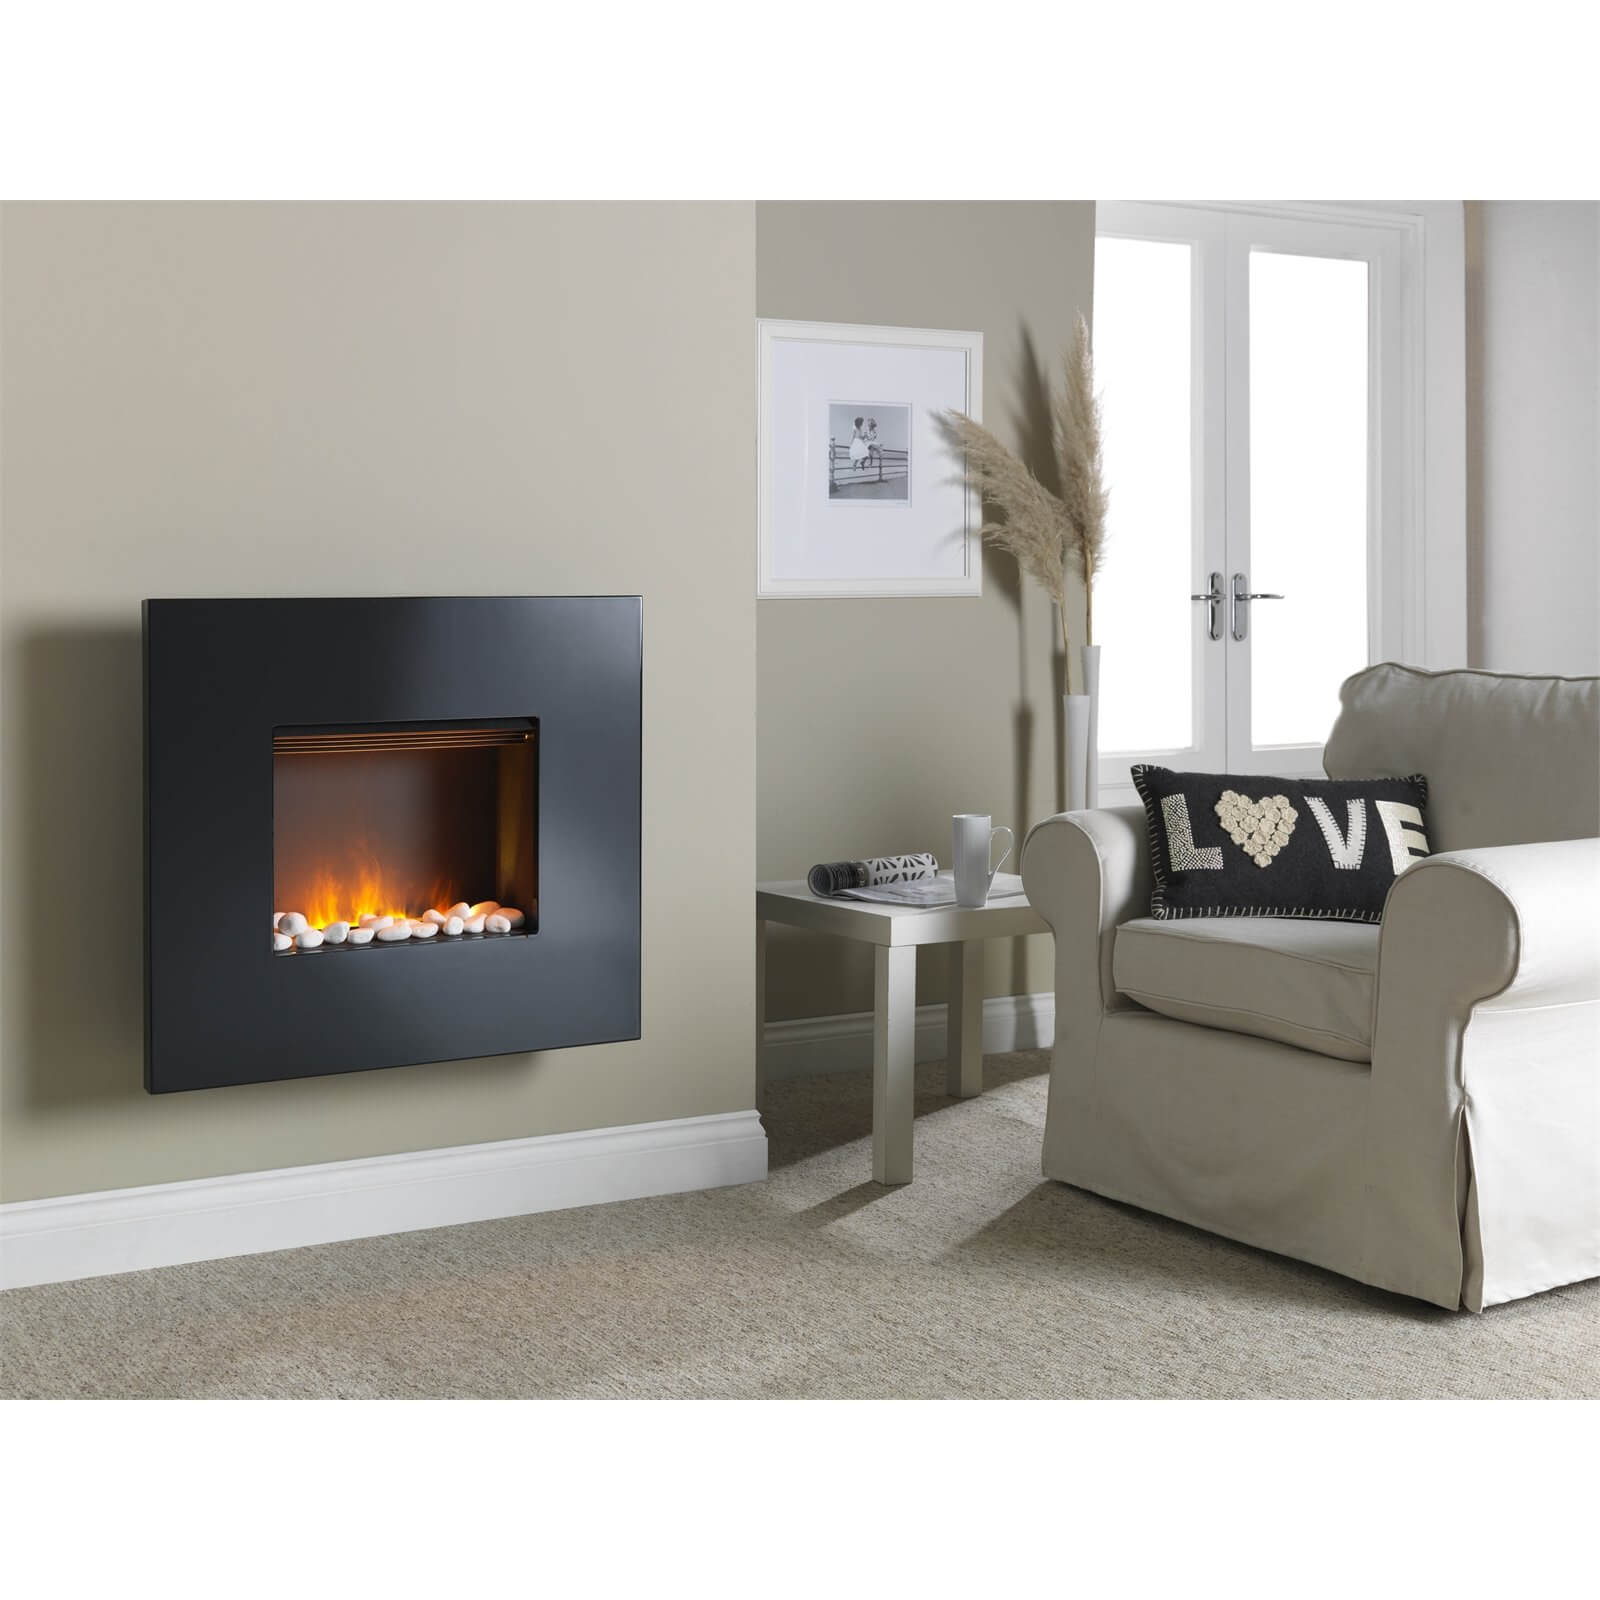 Dimplex Pemberley Optimyst 2kW Electric Fire with Wall Mounted Fitting - Black